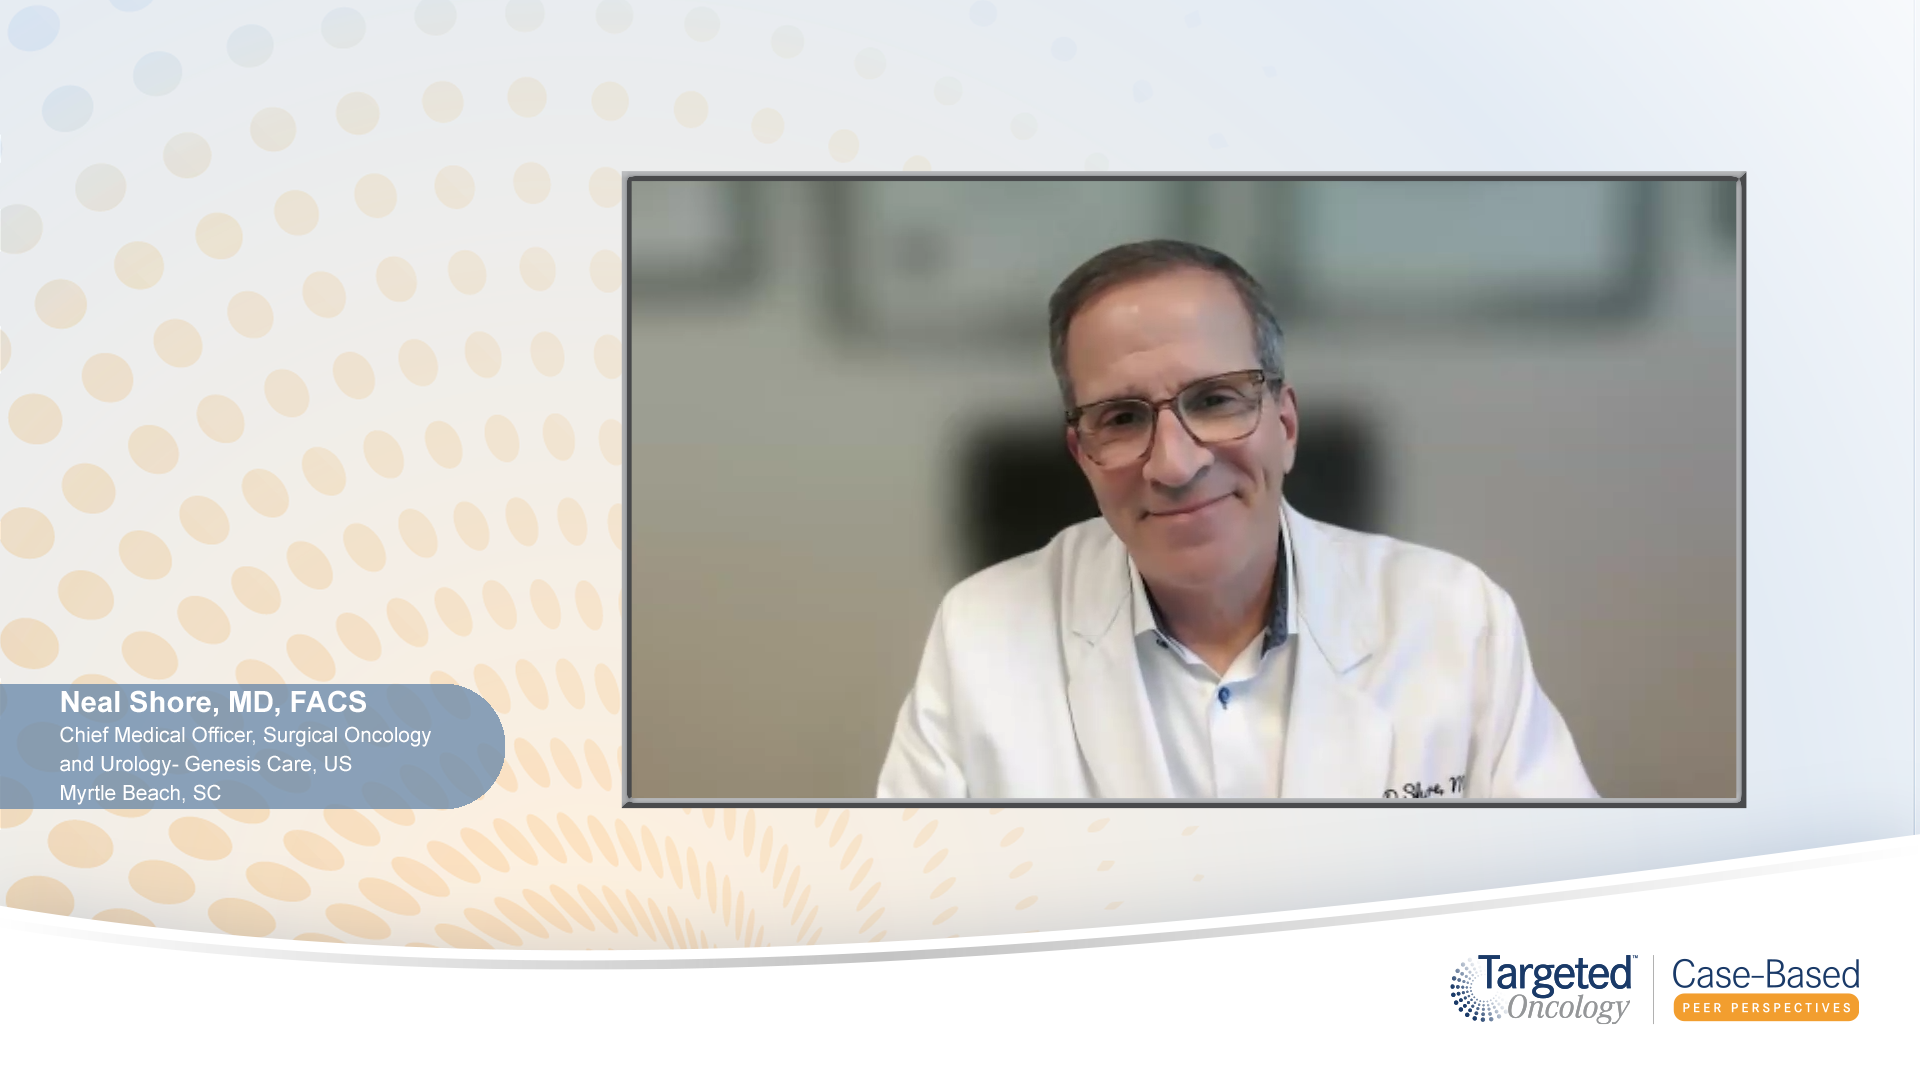 Video 8 - "Clinical Pearls for Optimal Management of mHSPC"